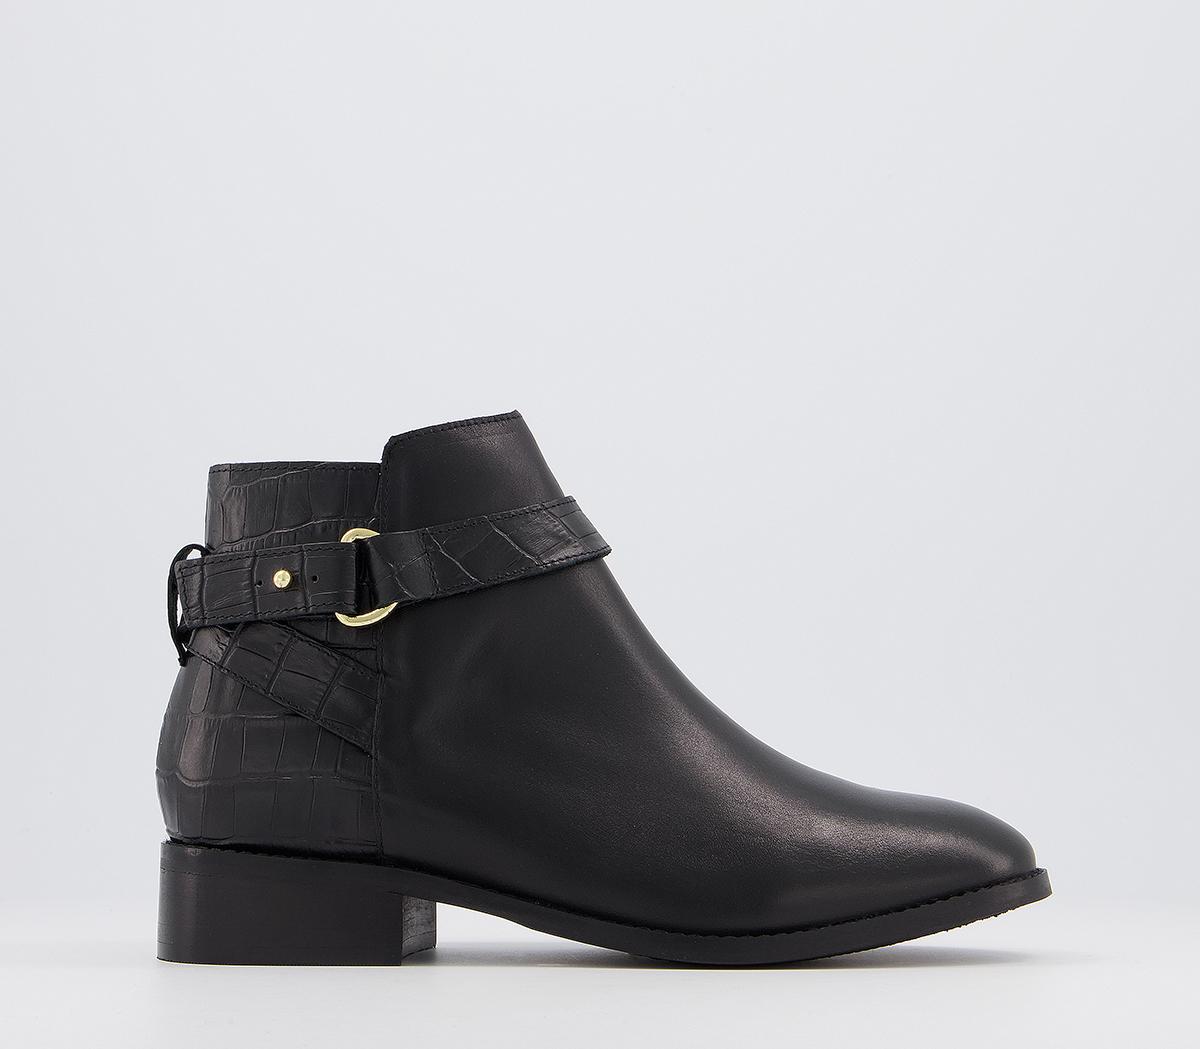 Adapt Feature Hardware Ankle Boots